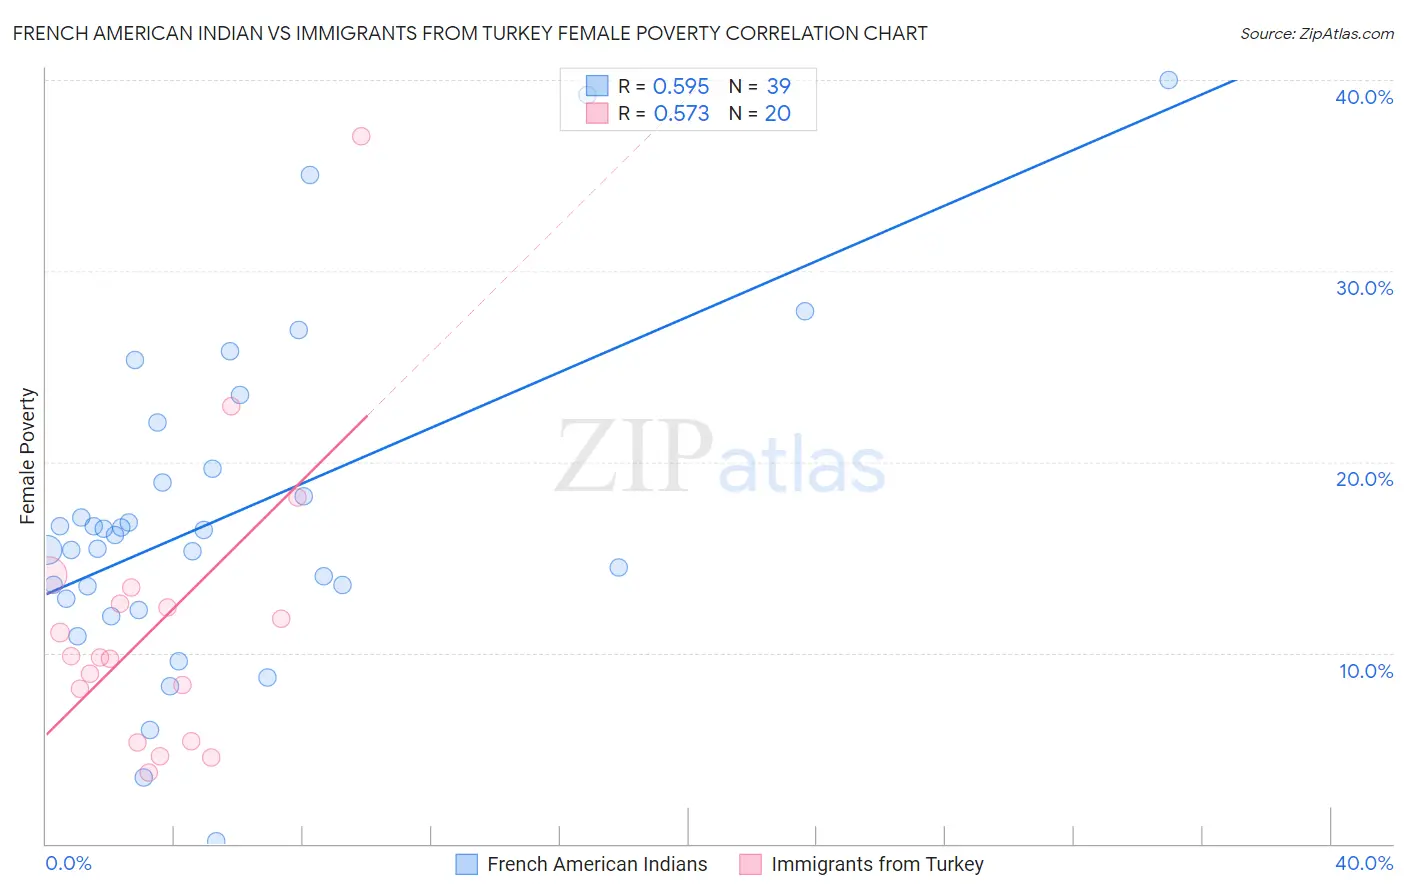 French American Indian vs Immigrants from Turkey Female Poverty